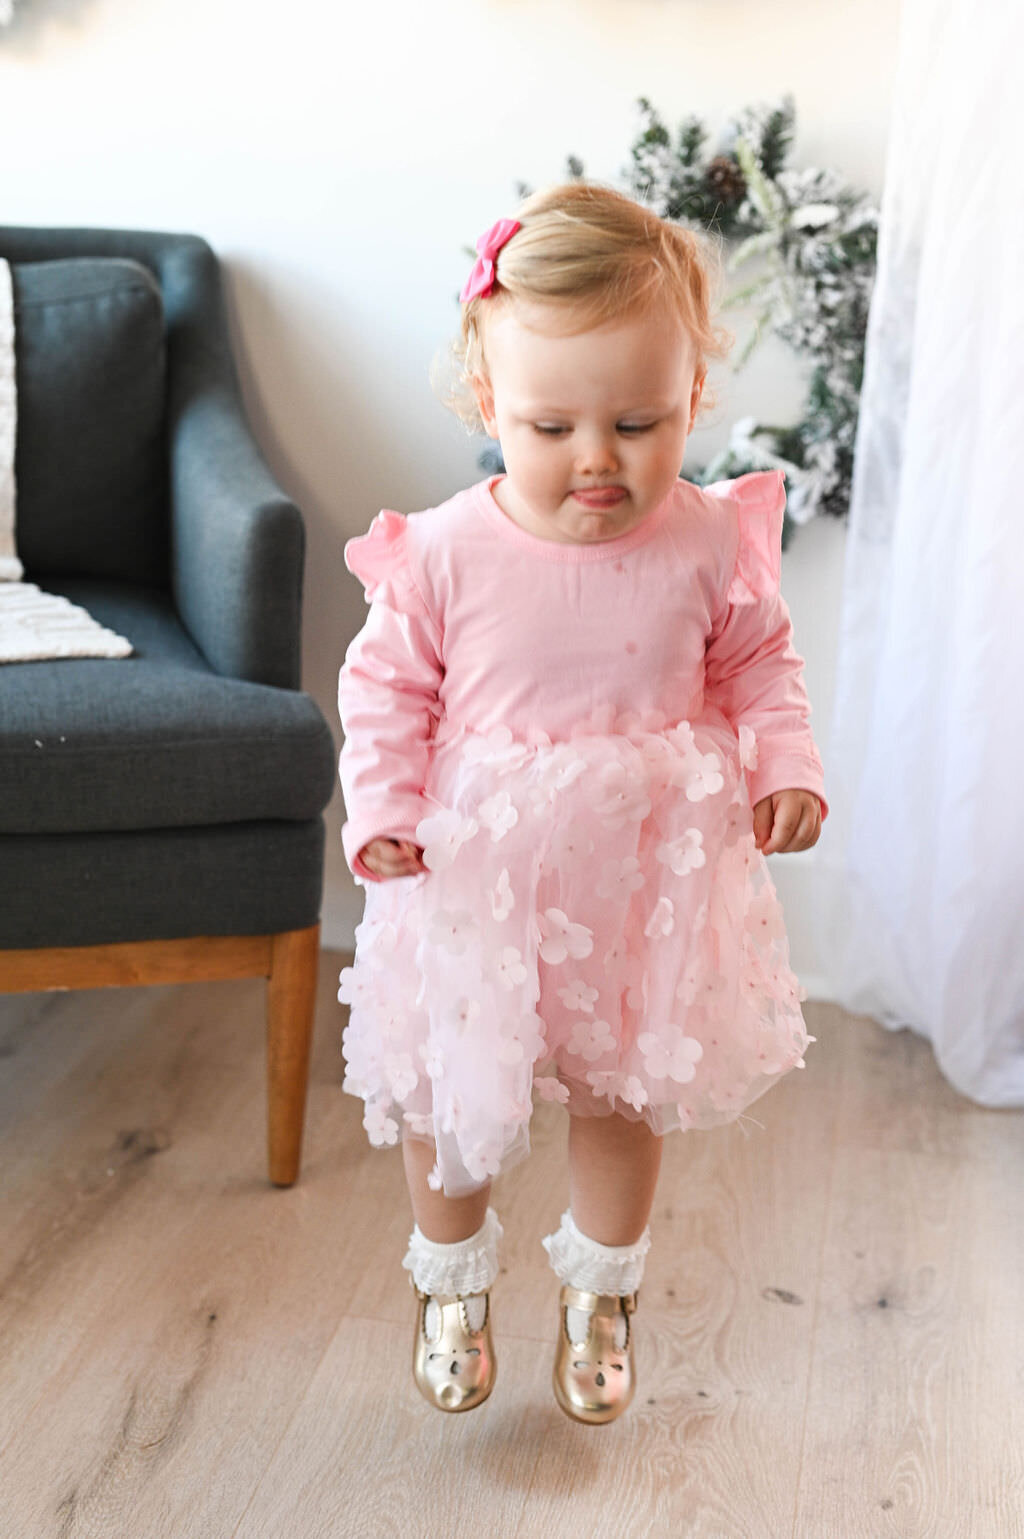 A toddler in a pink dress jumping.